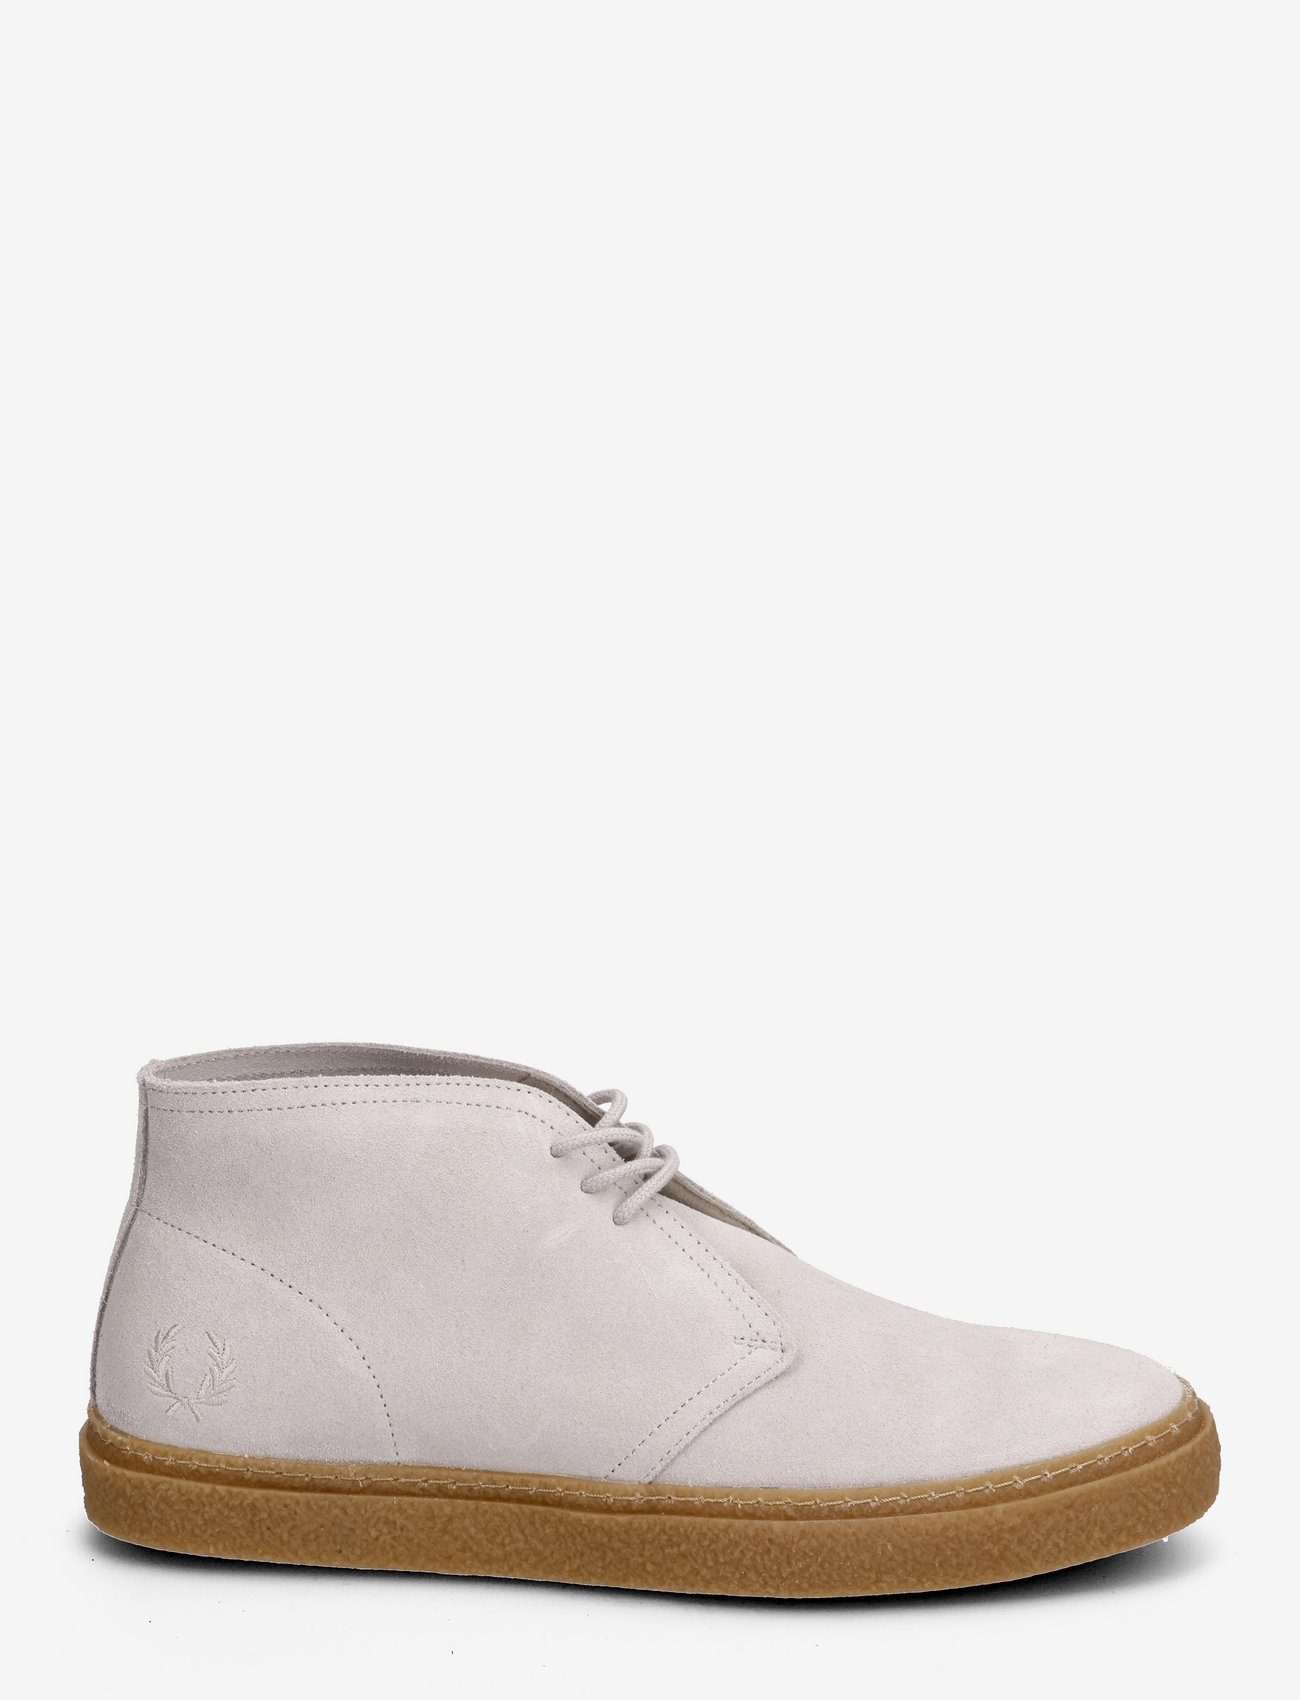 Fred Perry - HAWLEY SUEDE - aavikkokengät - light oyster - 1